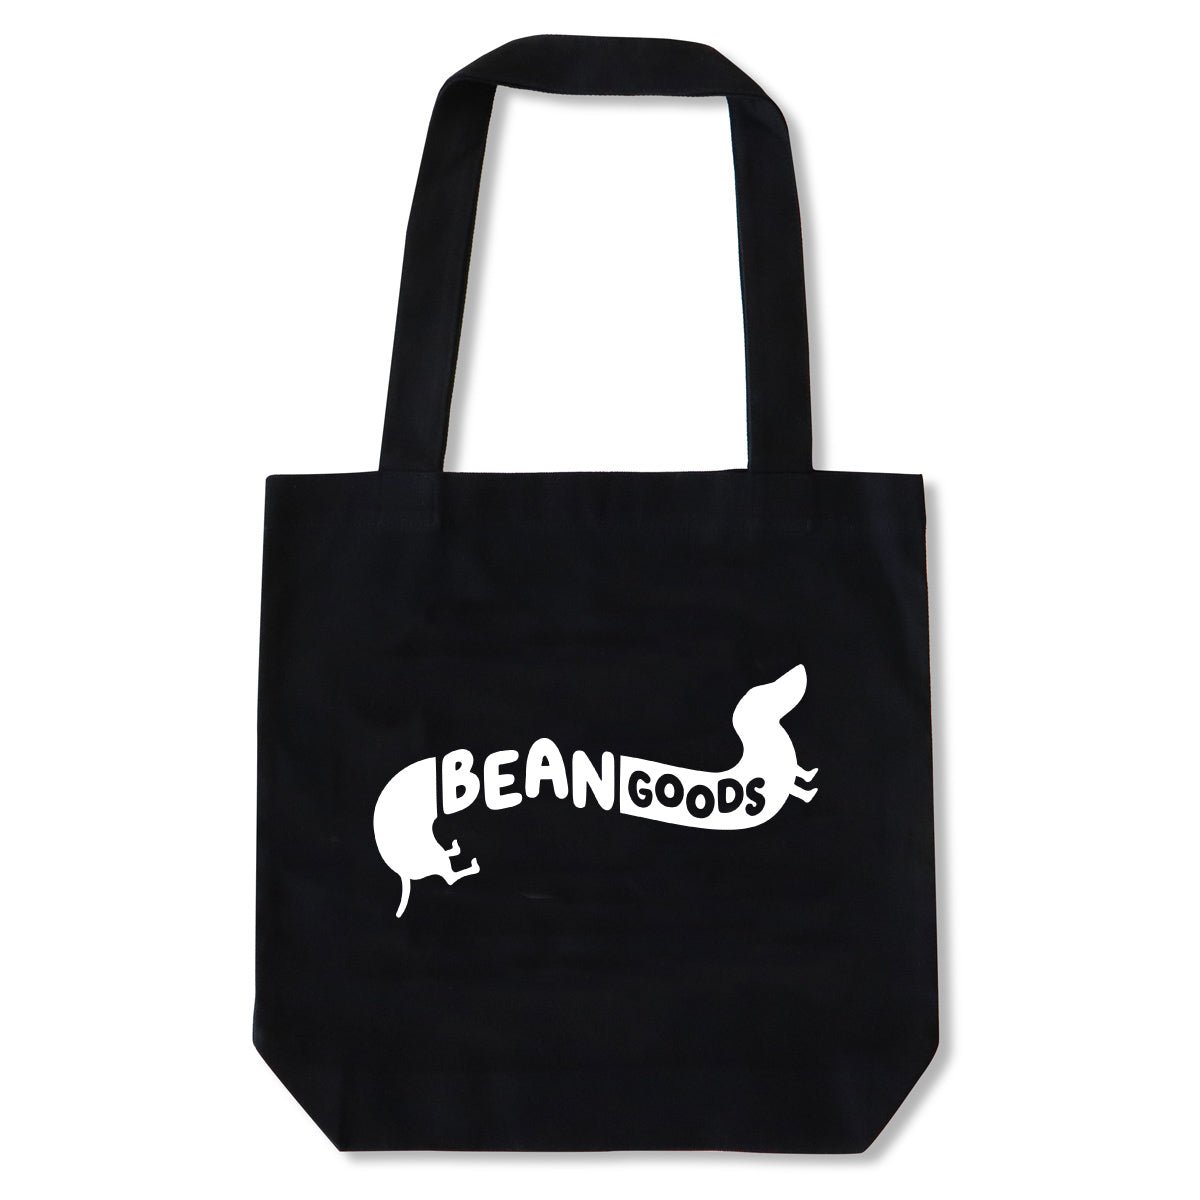 build your own tote - bean goods